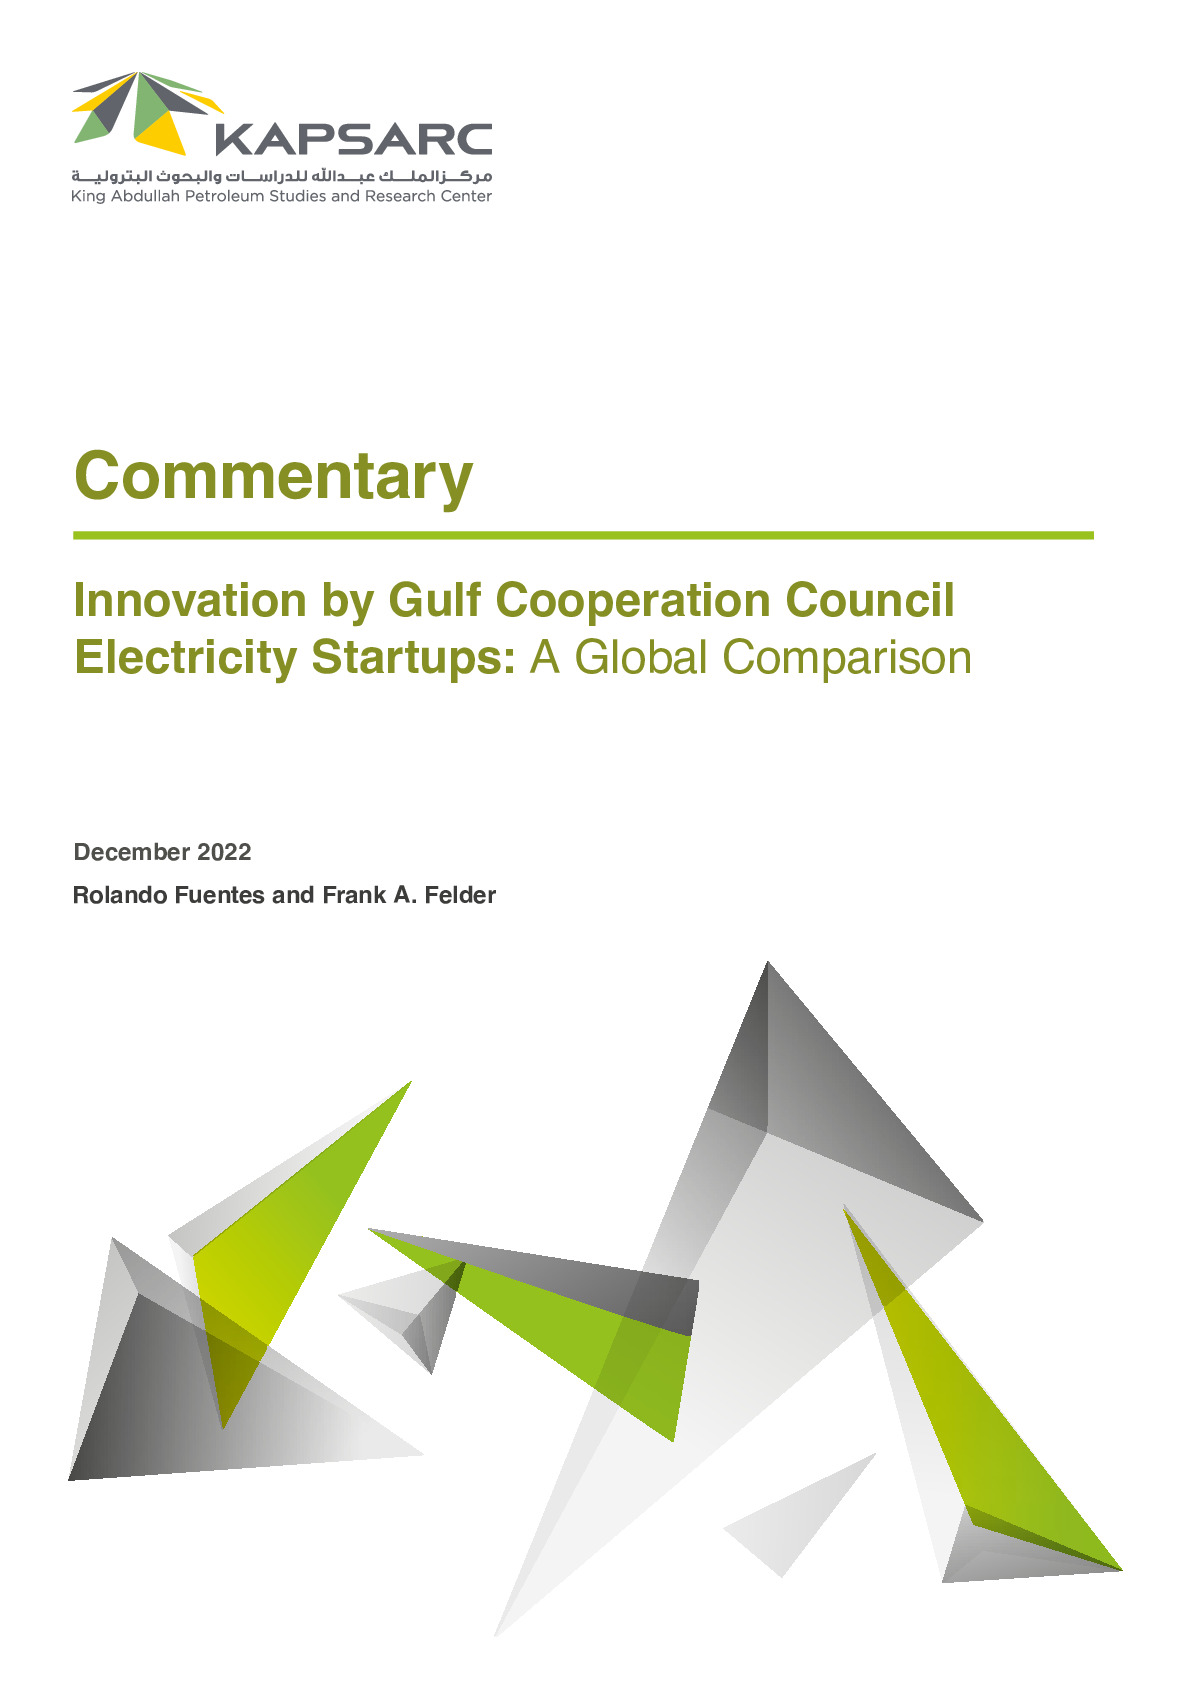 Innovation by Gulf Cooperation Council Electricity Startups: A Global Comparison